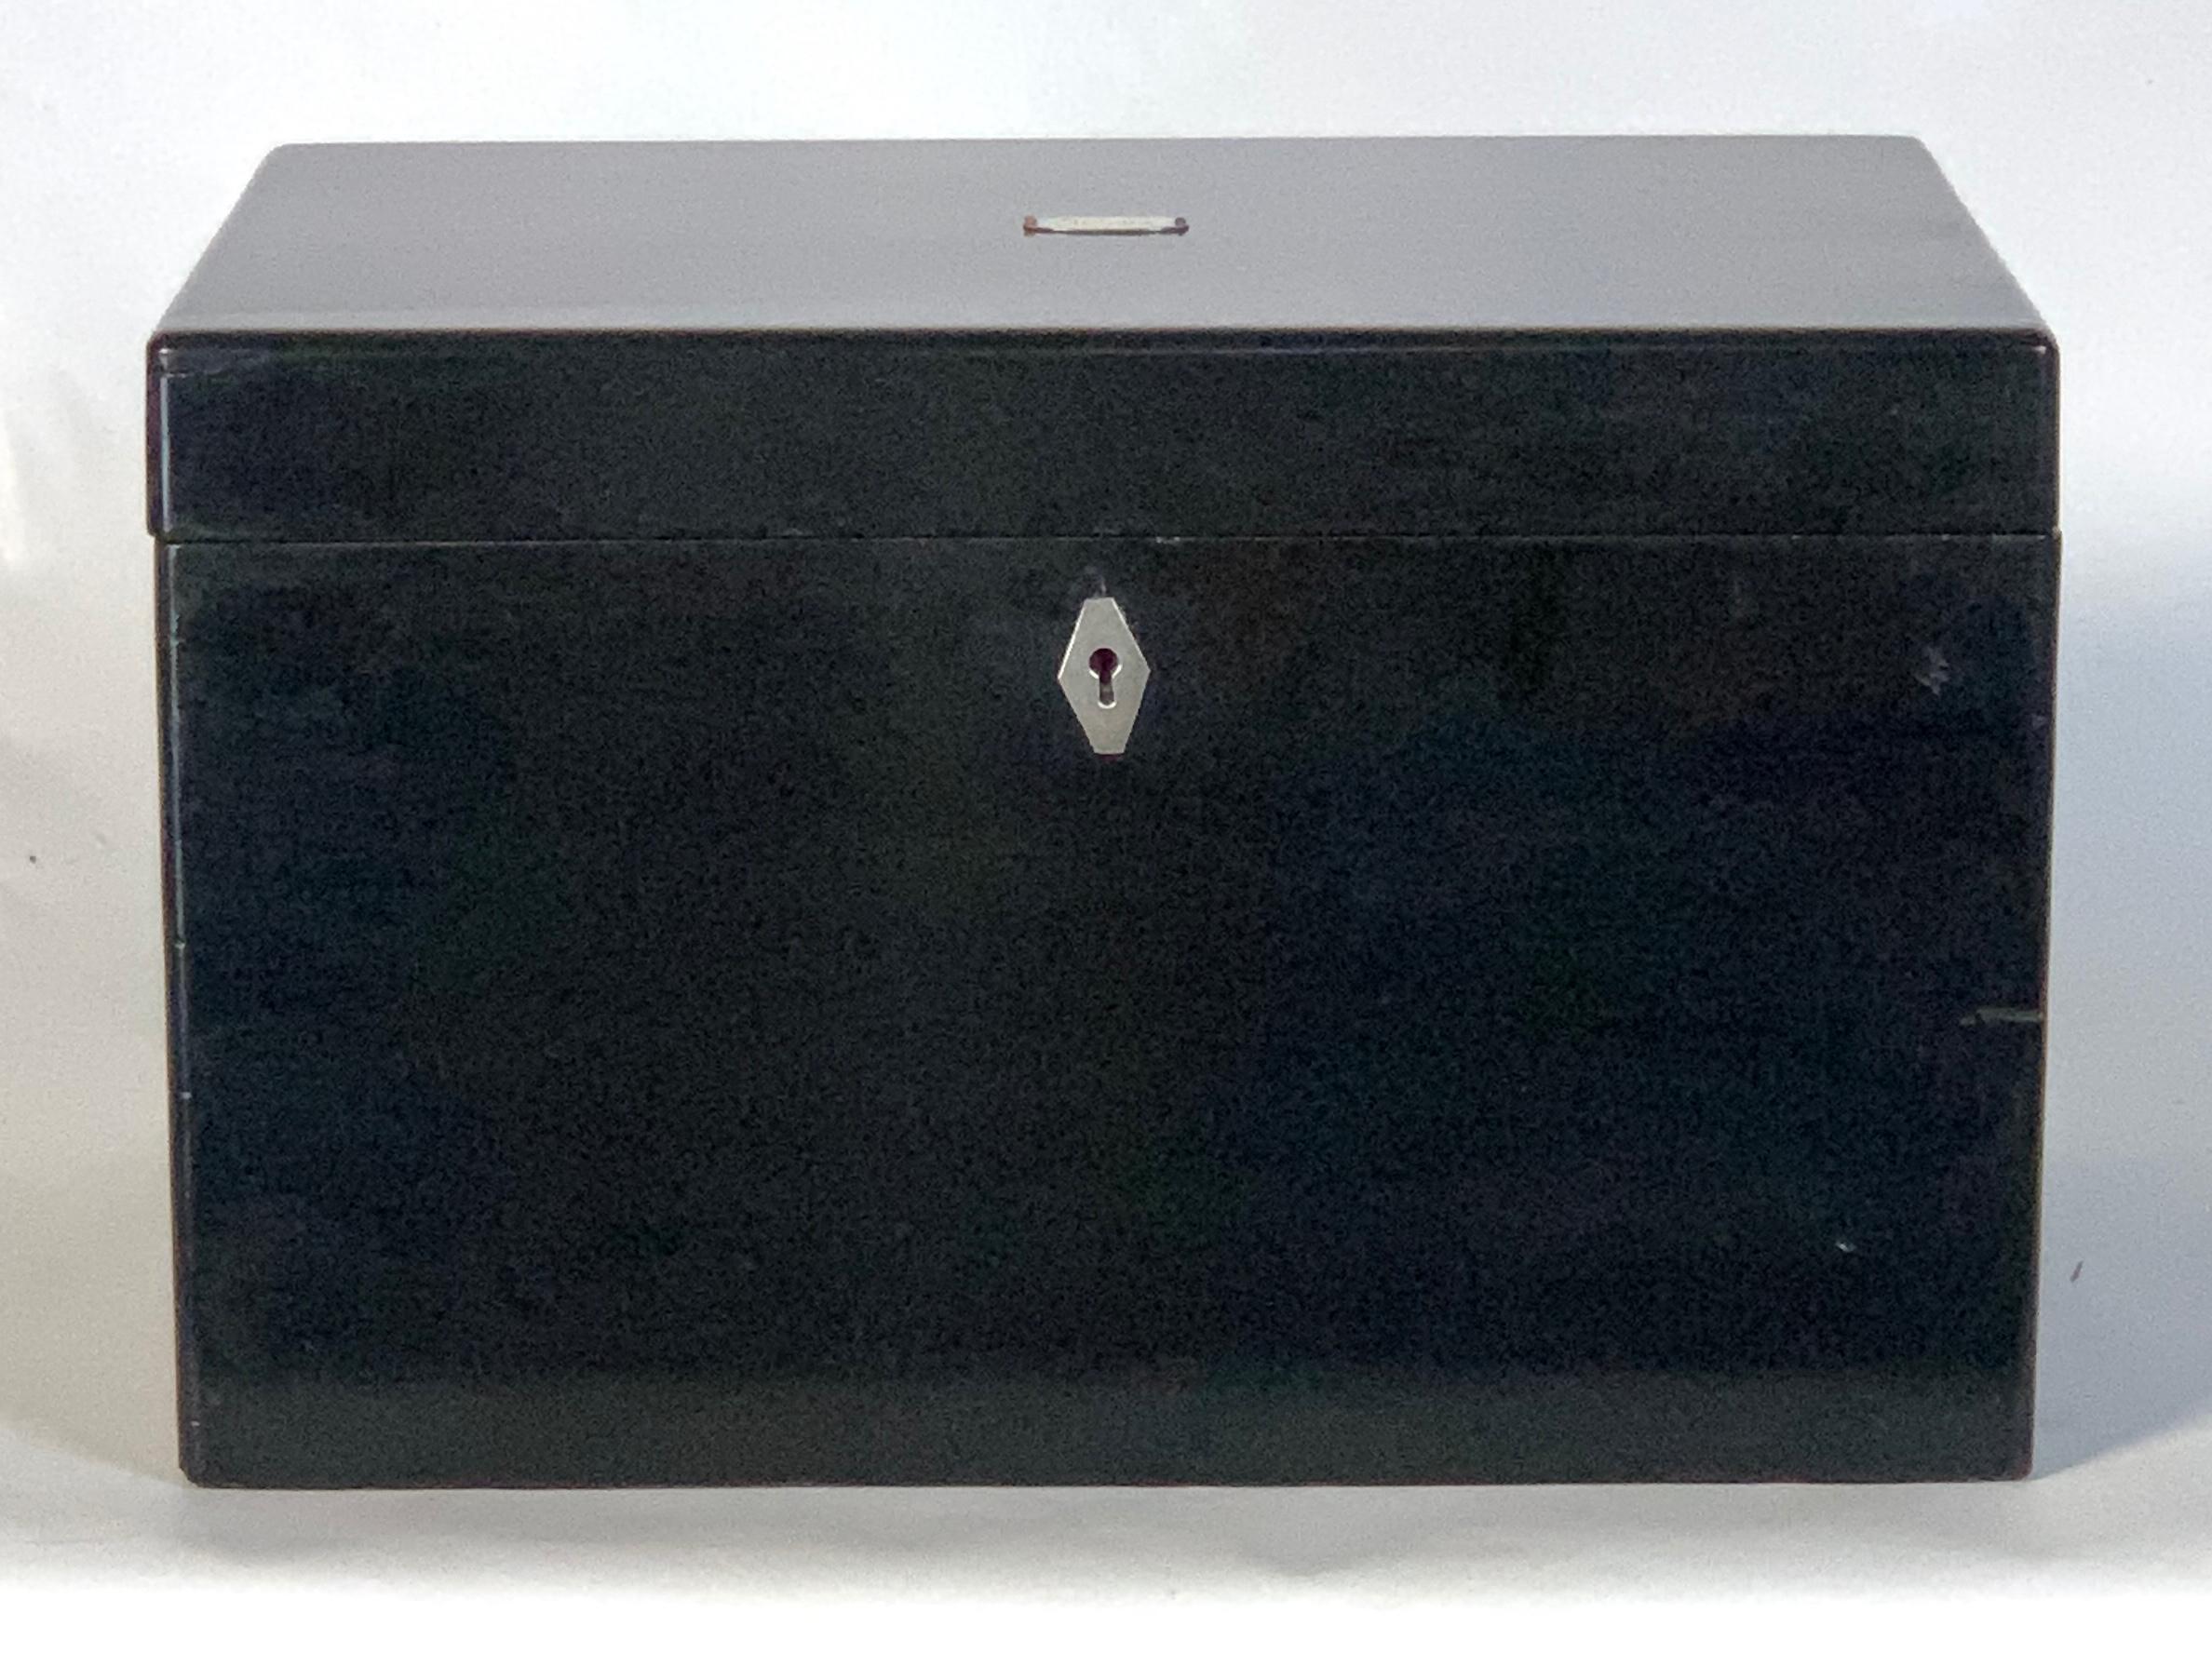 A large Chinese lacquer cigar humidor with engraved silver mount on top opening to reveal a heavily engraved lid and pewter lining.